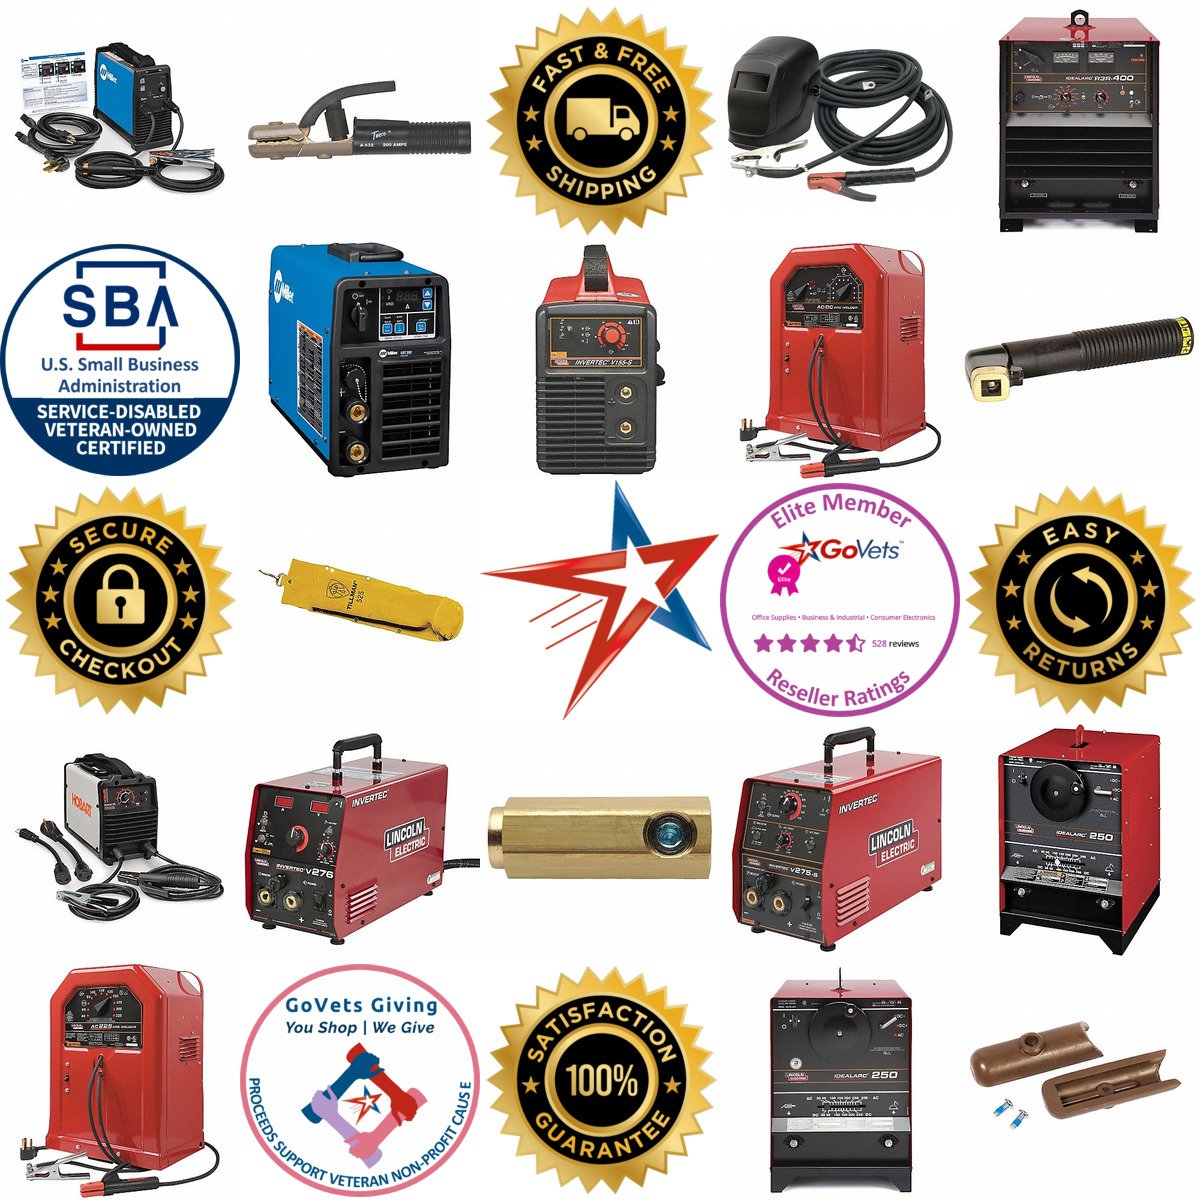 A selection of Stick Welding and Accessories products on GoVets